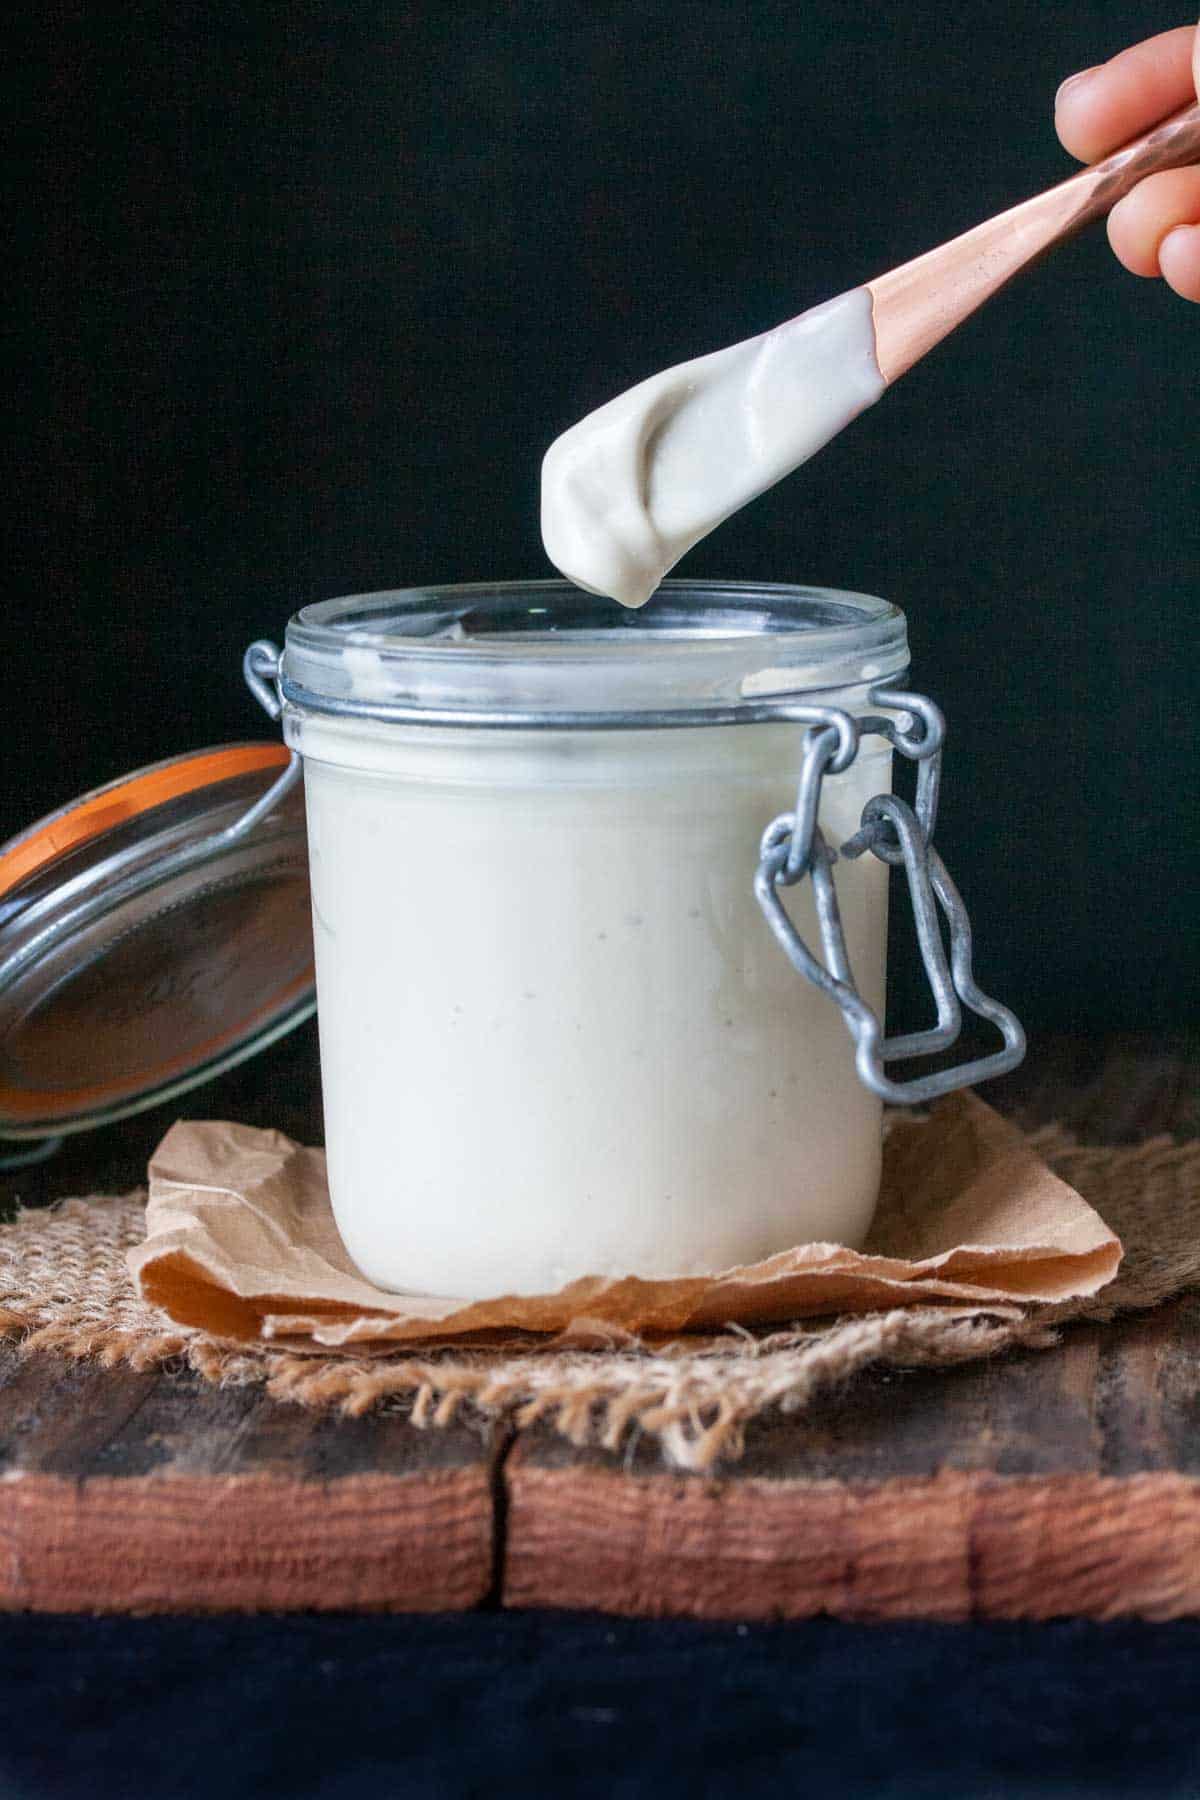 Knife coming out of a jar of homemade mayo with mayo on it